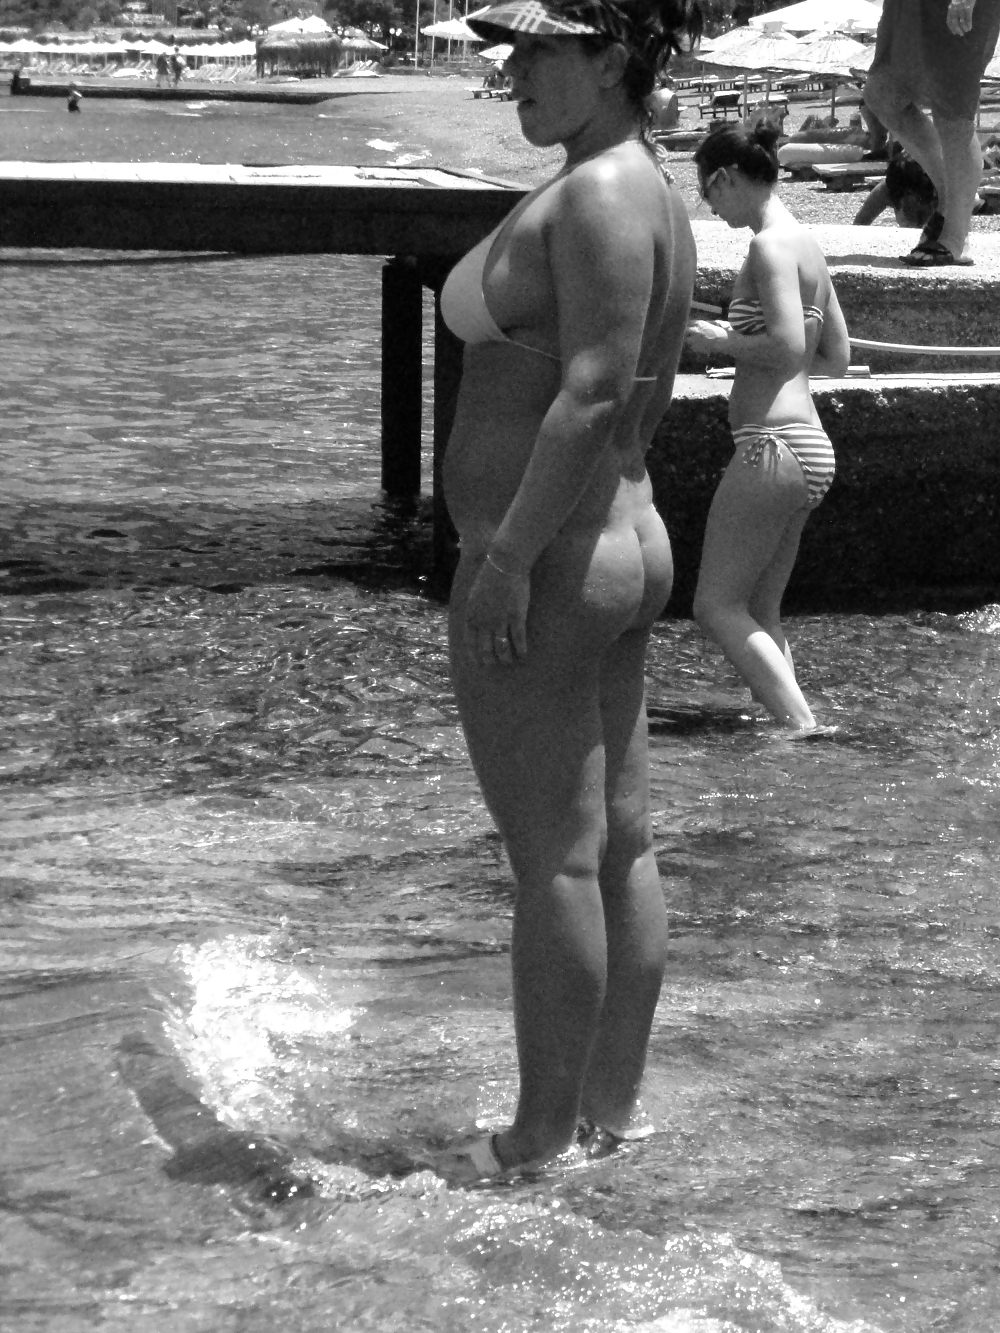 Me naked at the nudist beach #19796487